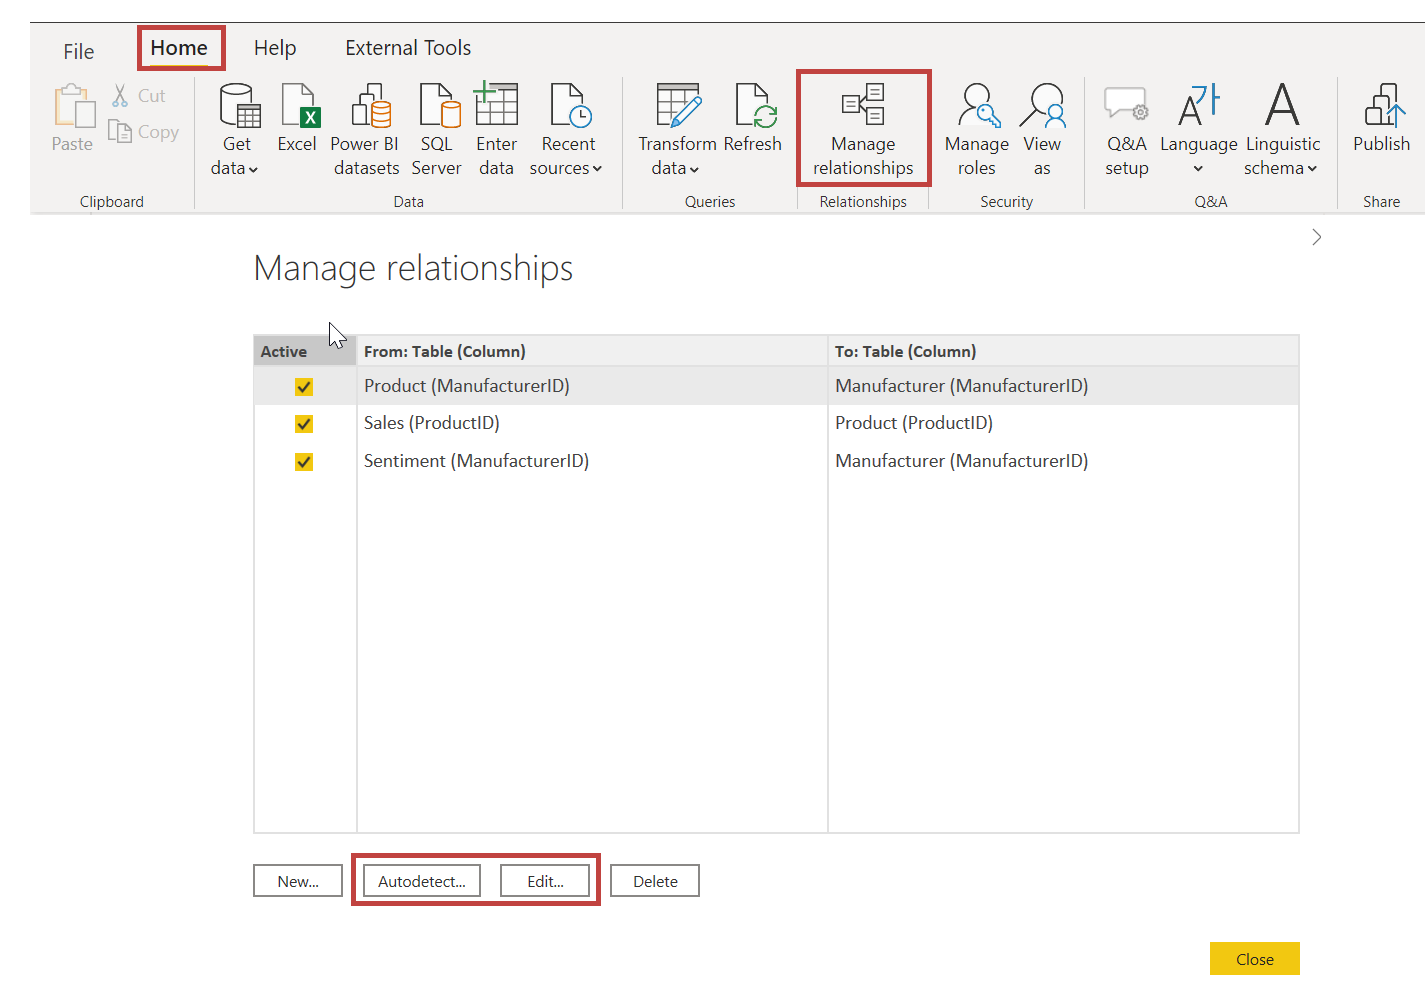 Screenshot of the Manage Relationships button and dialog.